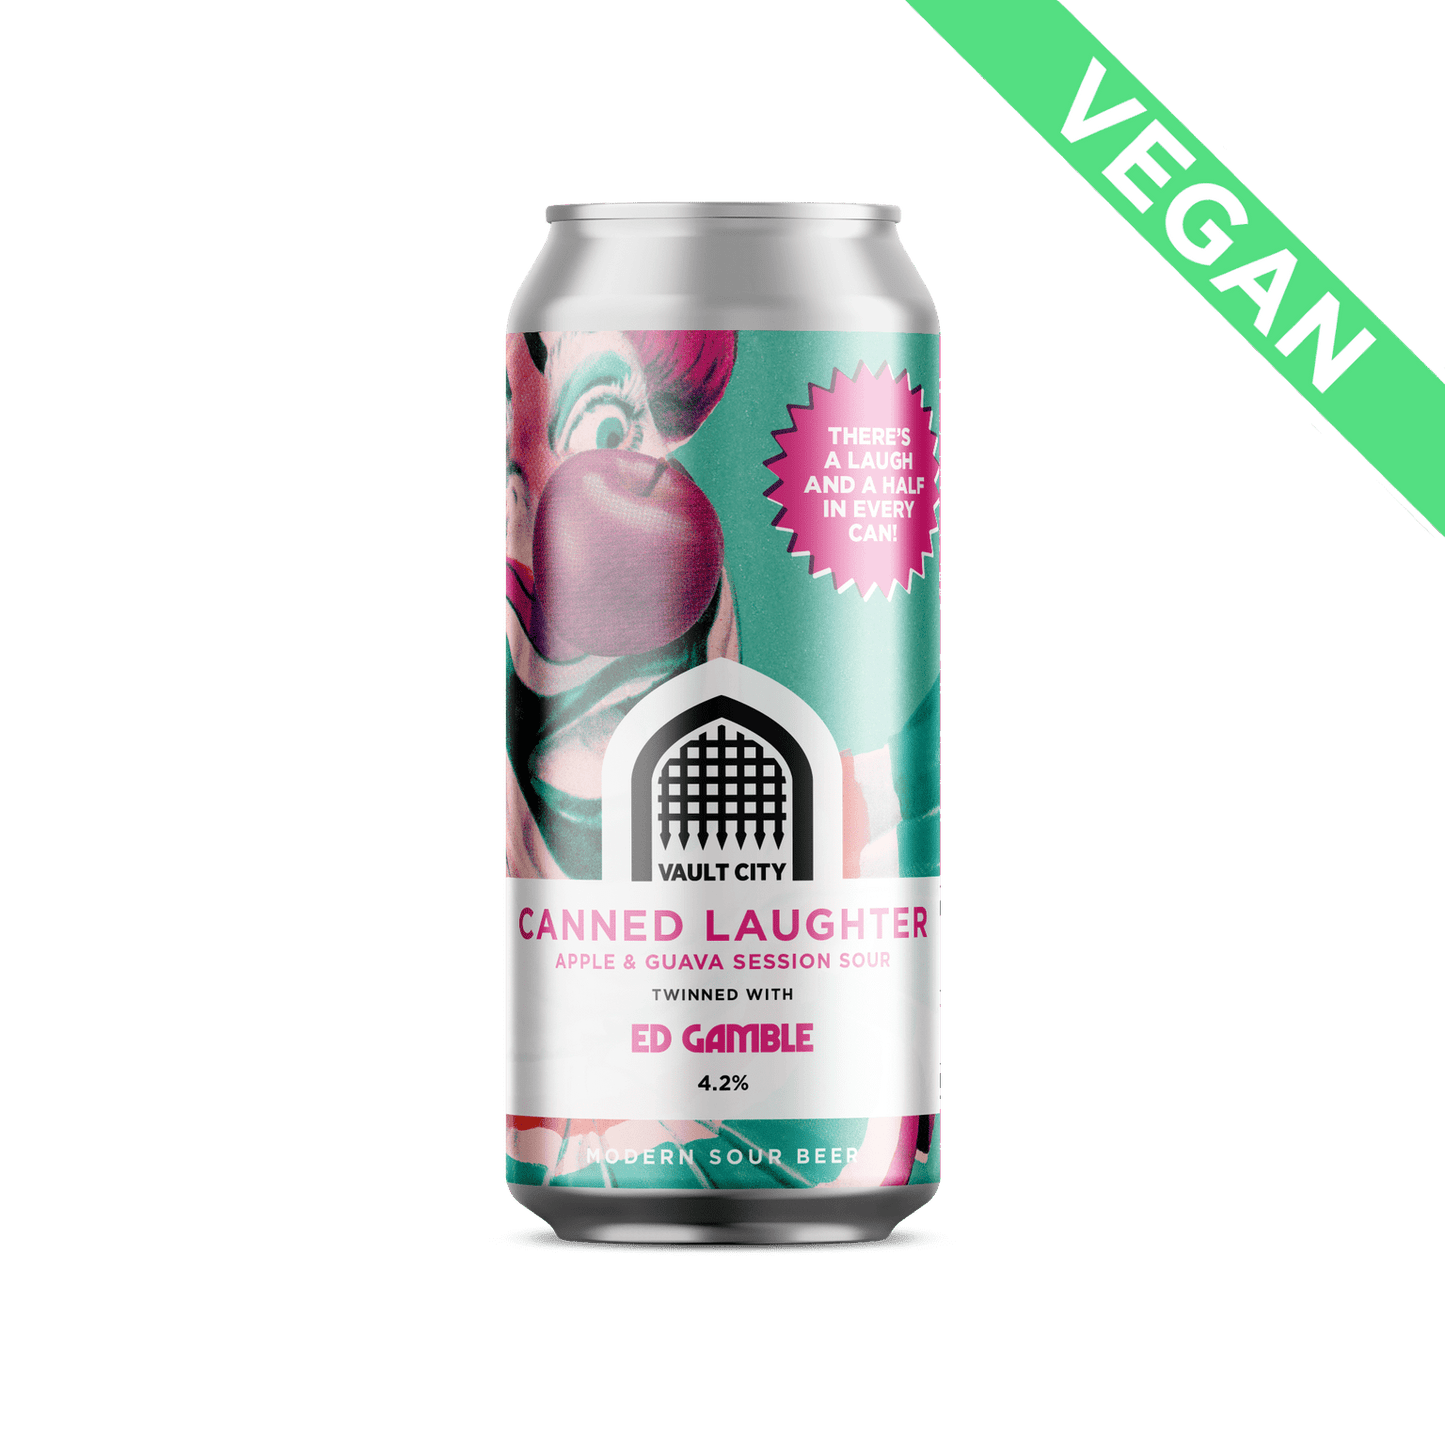 Canned Laughter, Apple & Guava Session Sour - Vault City x Ed Gamble